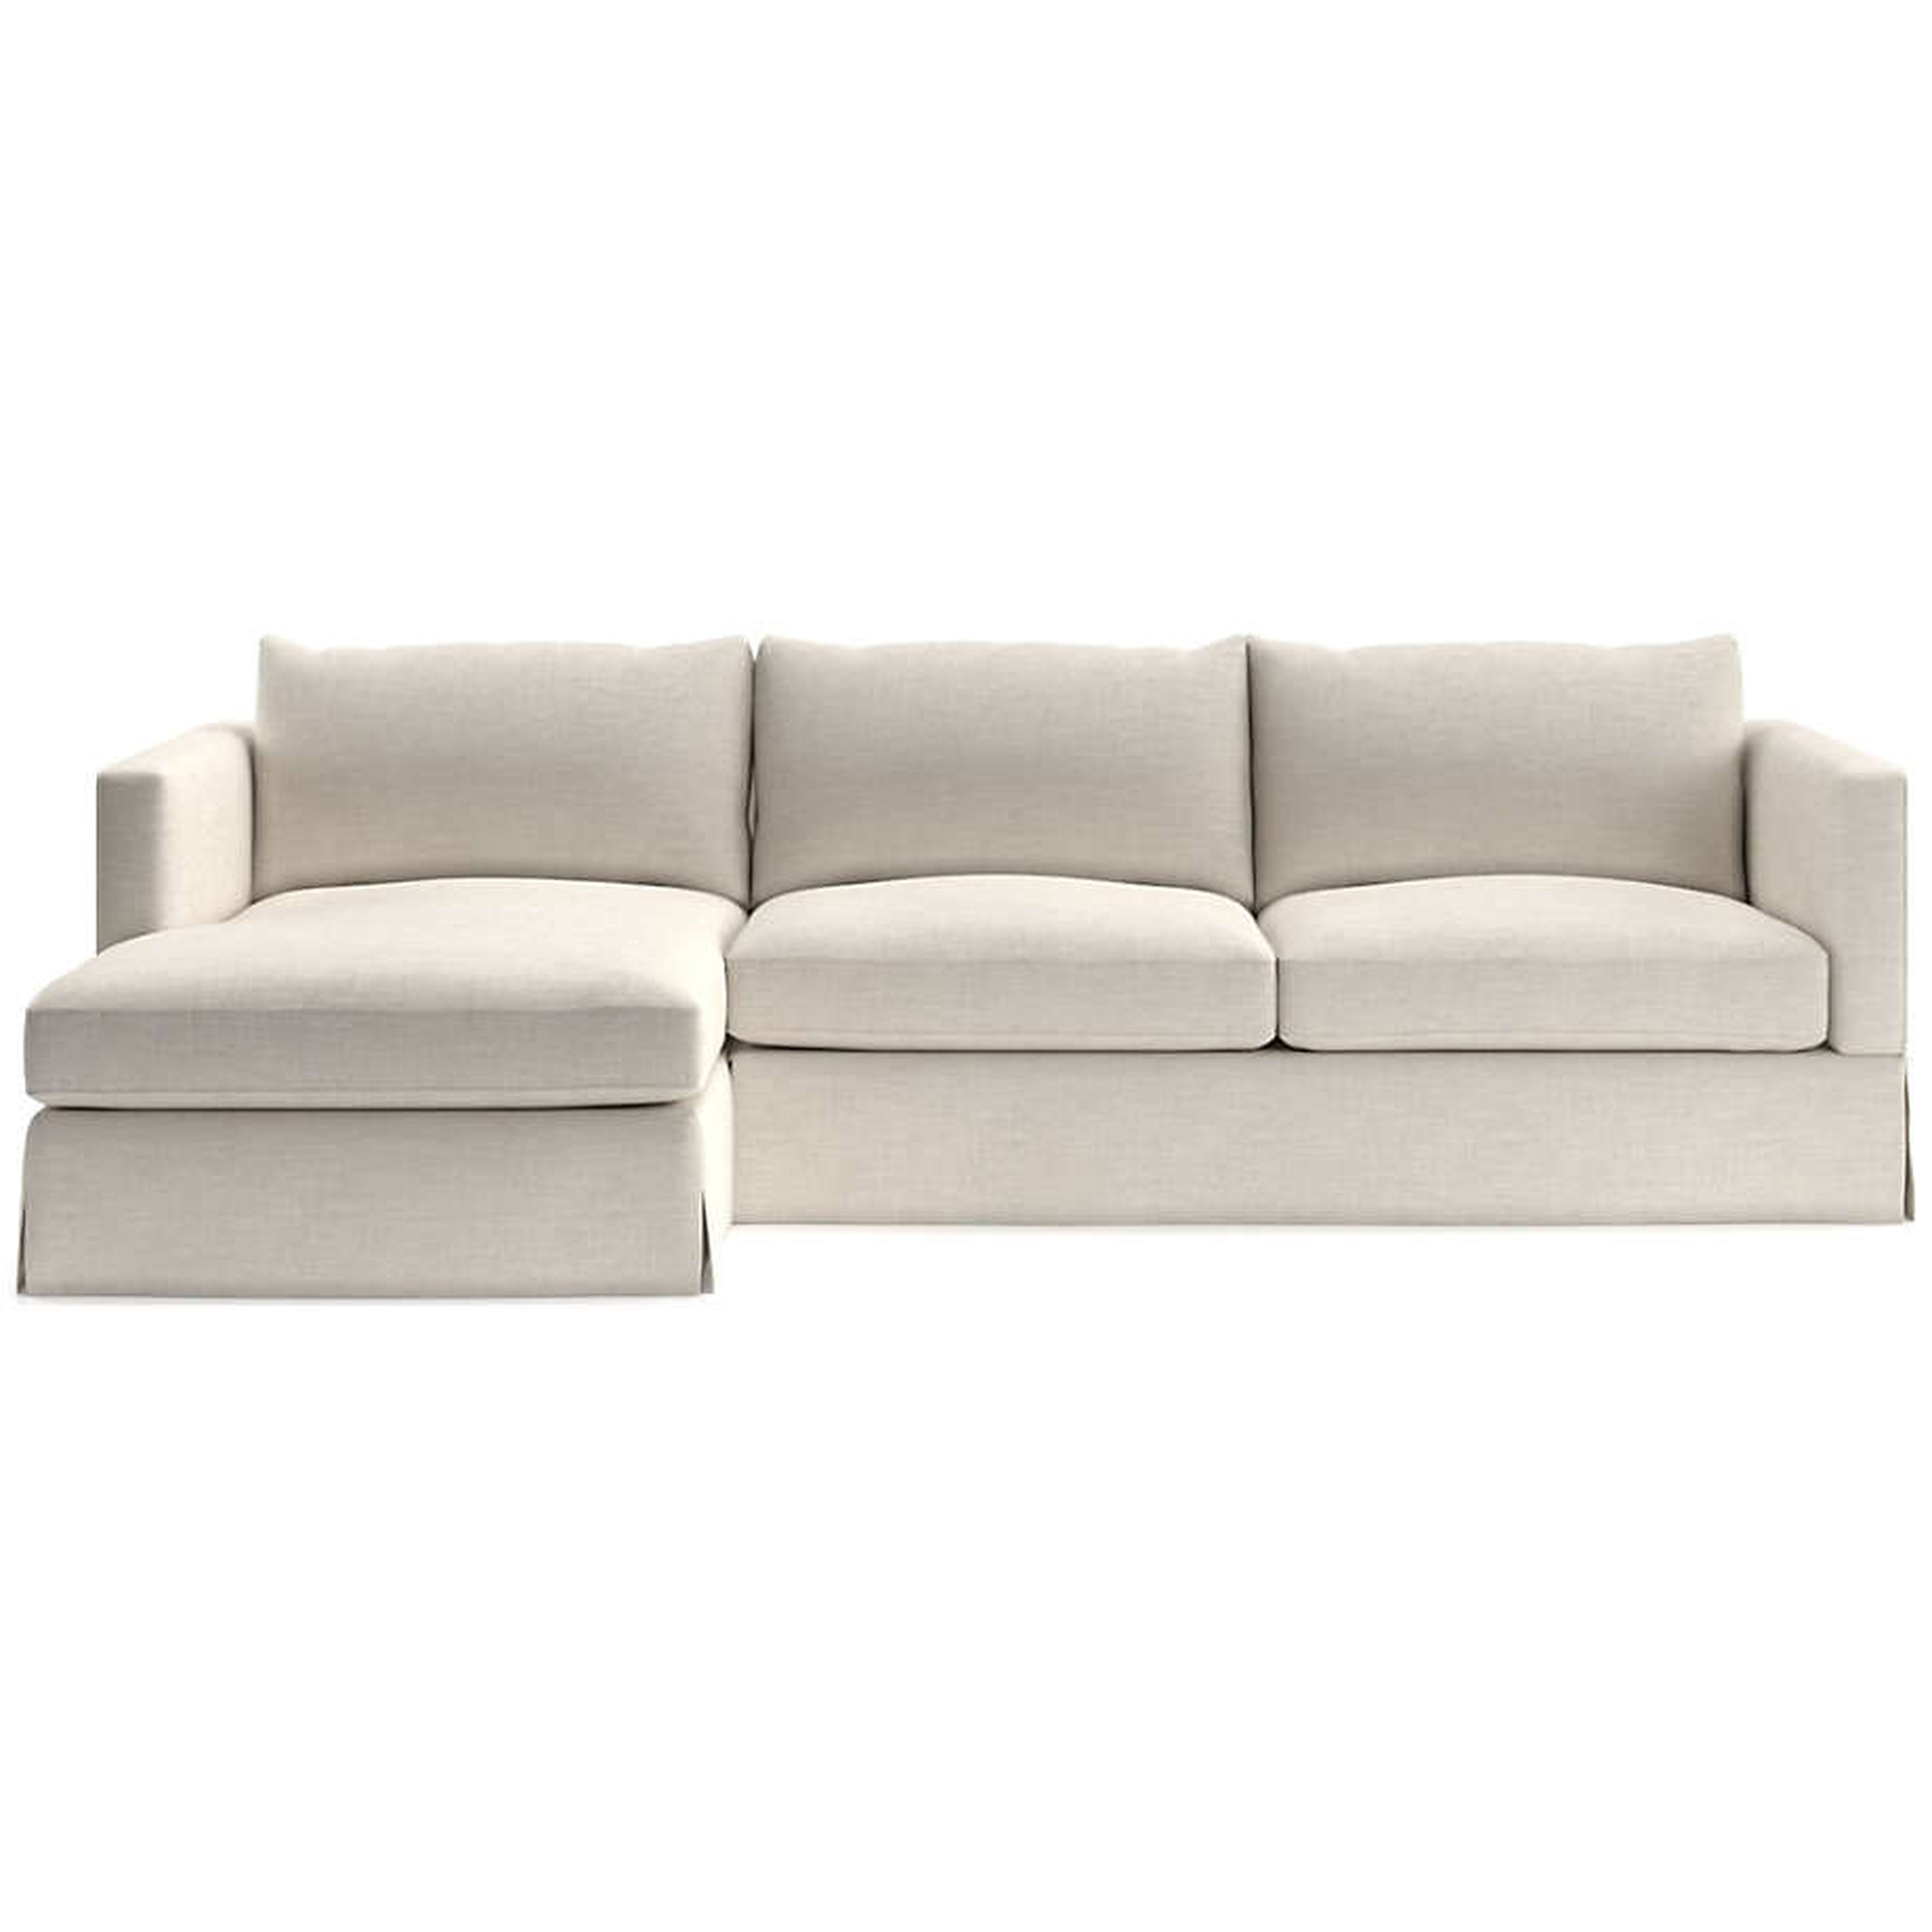 Magritte 2-Piece Sectional - Crate and Barrel